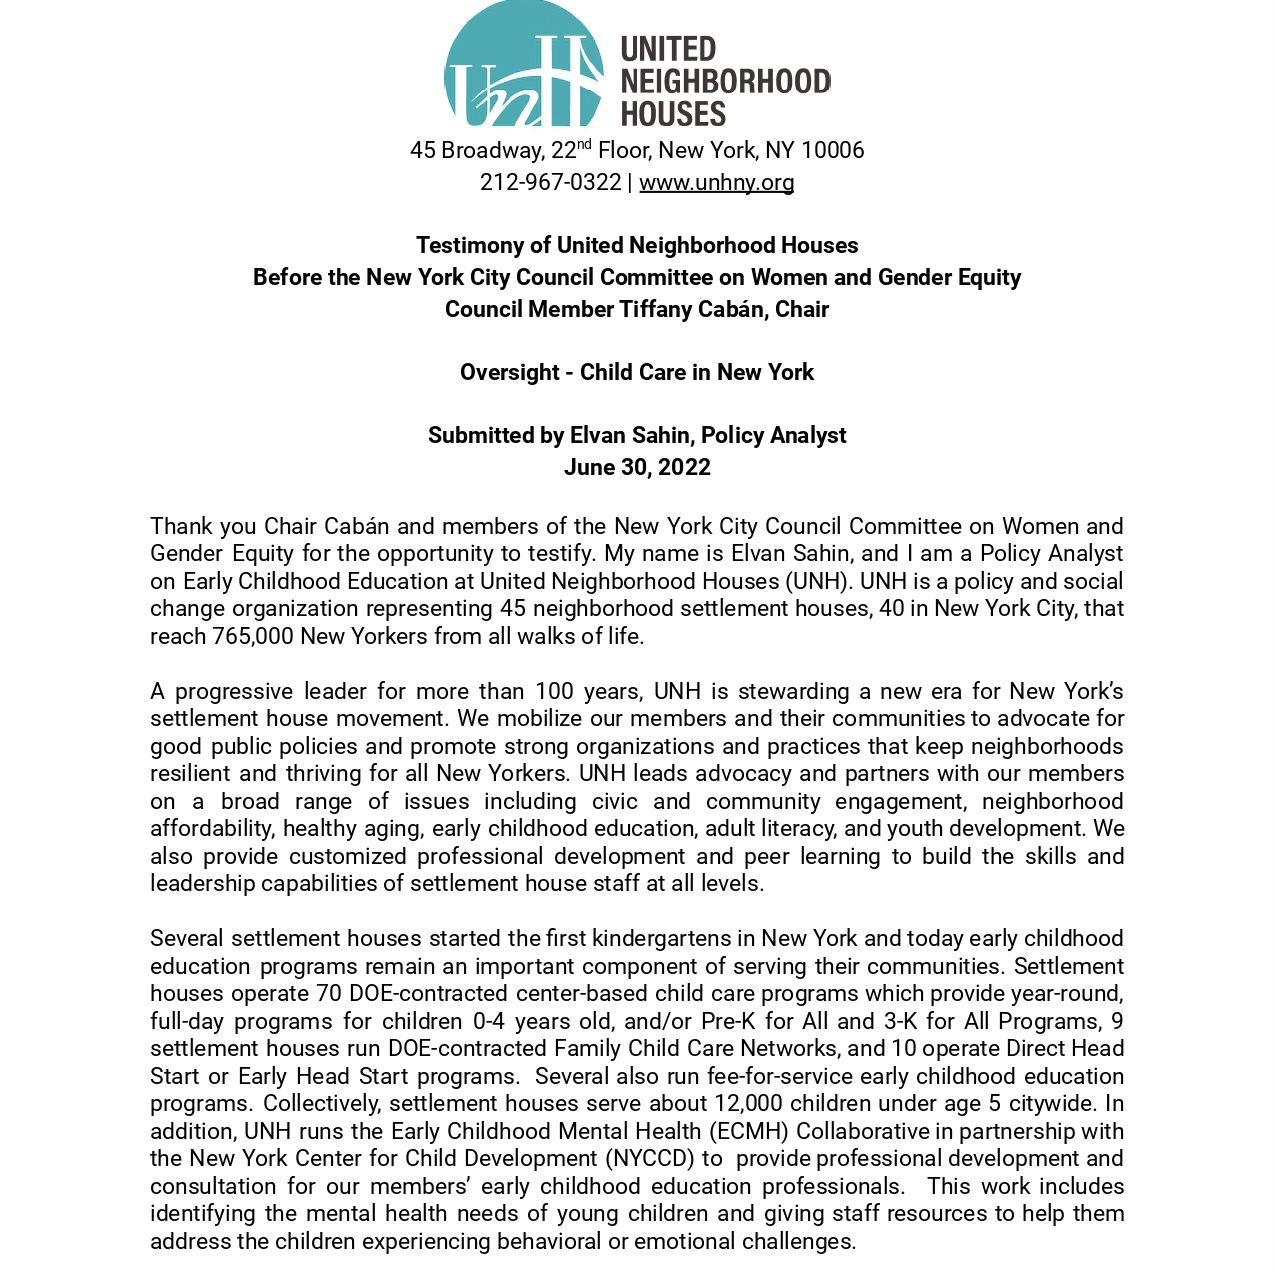 UNH Testimony - Oversight: Child Care in New York